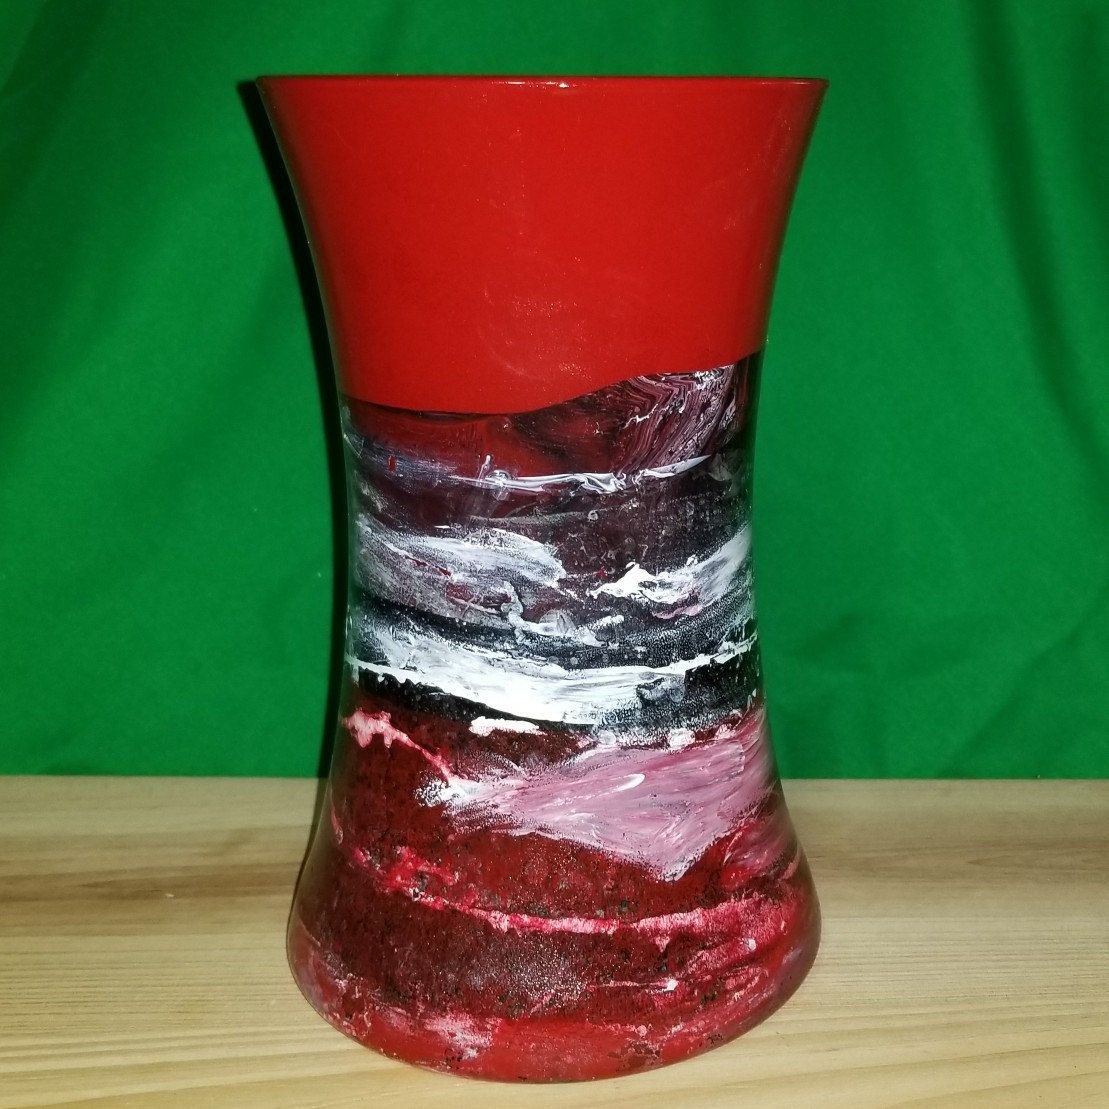 Cheap Red Vases Of Hand Painted Black and Red Vase Tall Modern Glass Vase and Its On Regarding Hand Painted Black and Red Vase Tall Modern Glass Vase and Its On Sale All Vases 20 Off